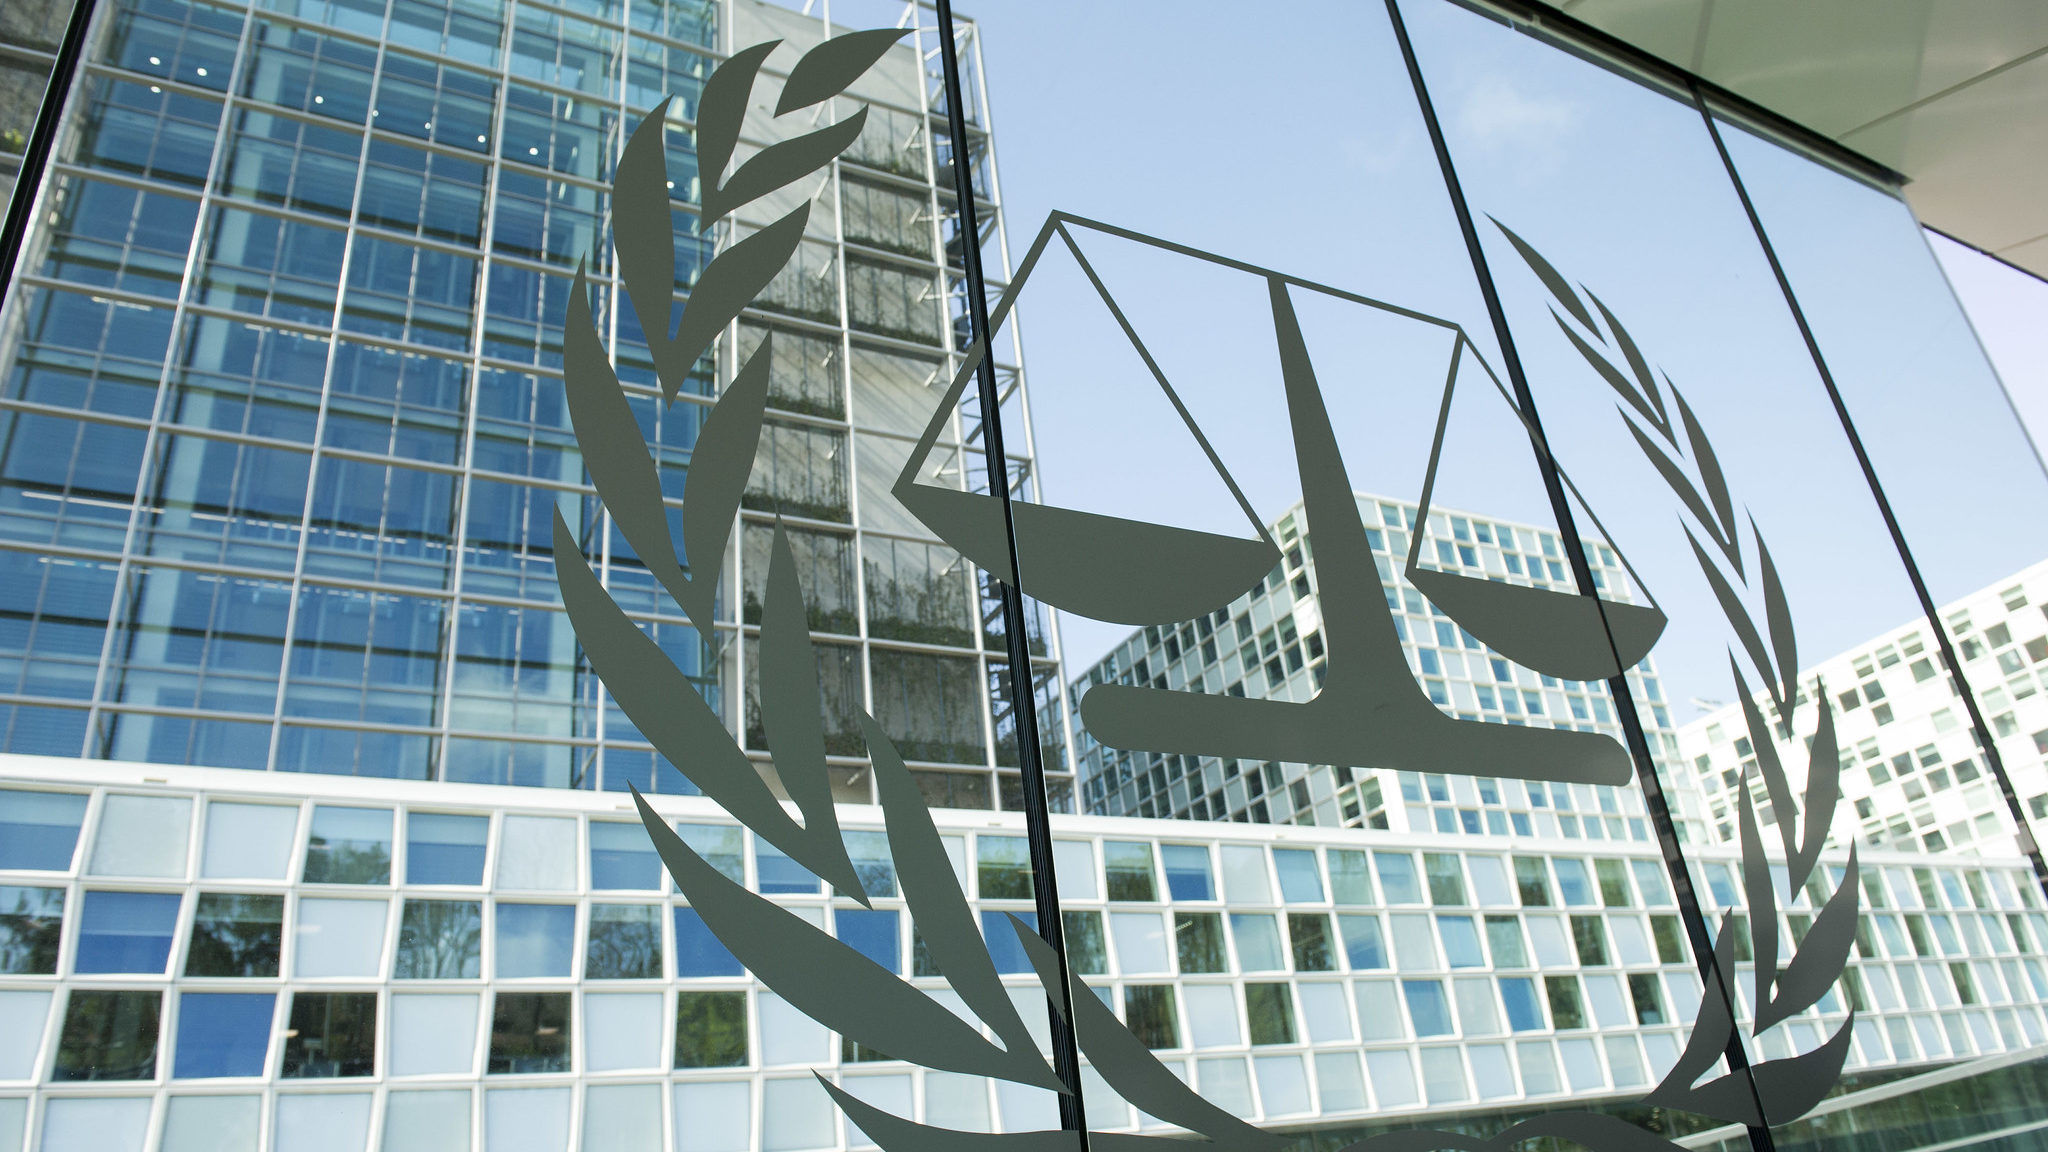 The ICC Opens a New Front in the War Against Israel. Why We Must Fight.